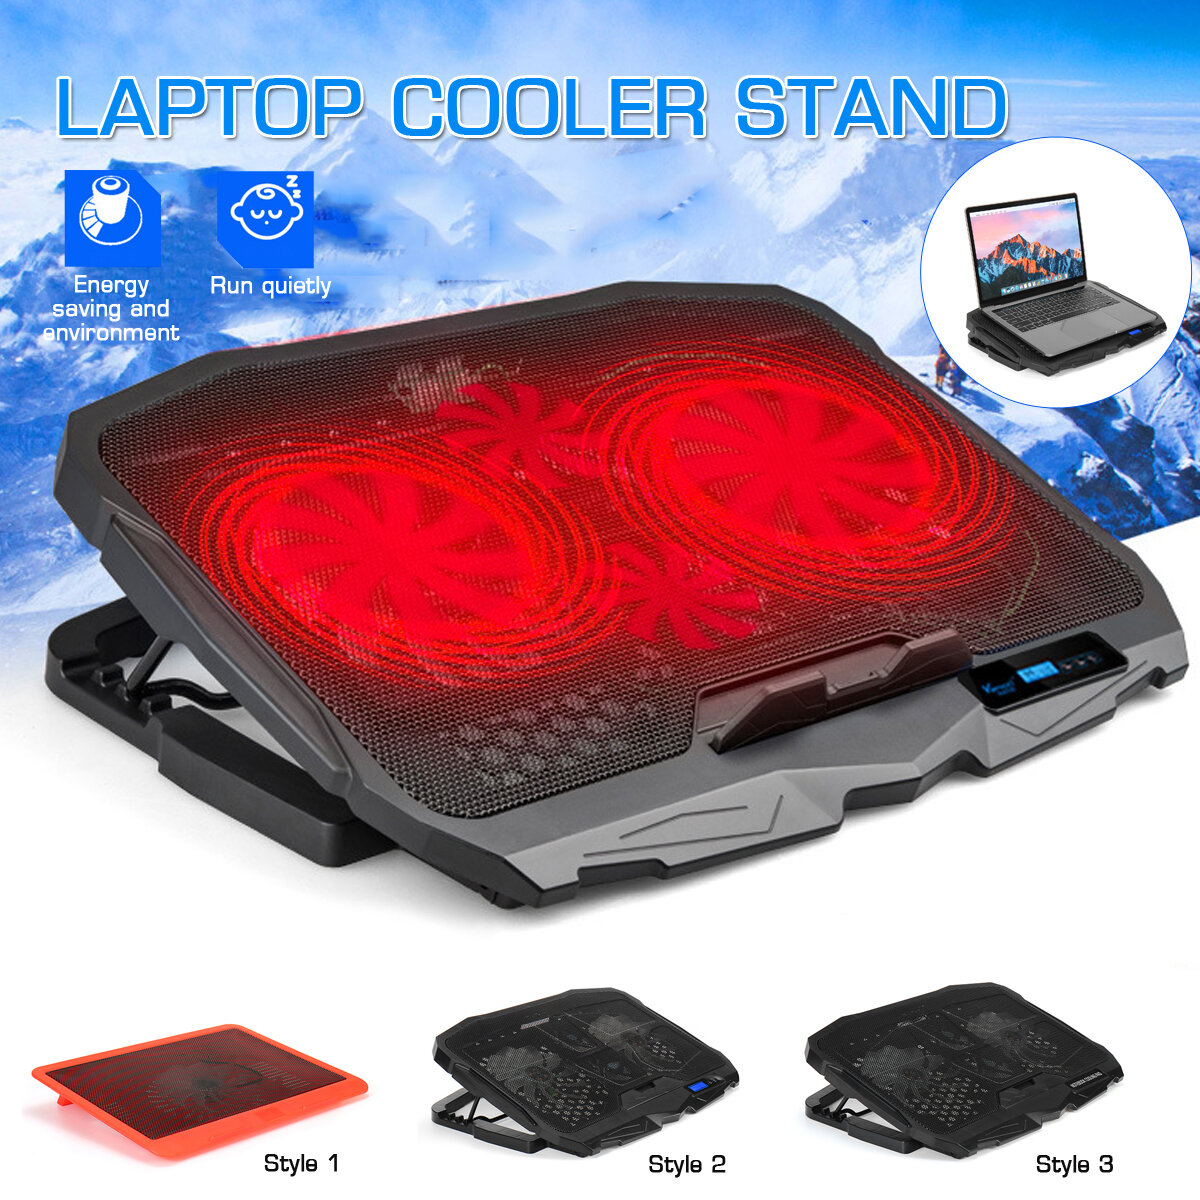 

Bakeey Adjustable Speed Laptop Stand Laptop Cooler Heat Dissipation For 13.0-17.0 Inch Laptop Notebook MacBook Air MacBo